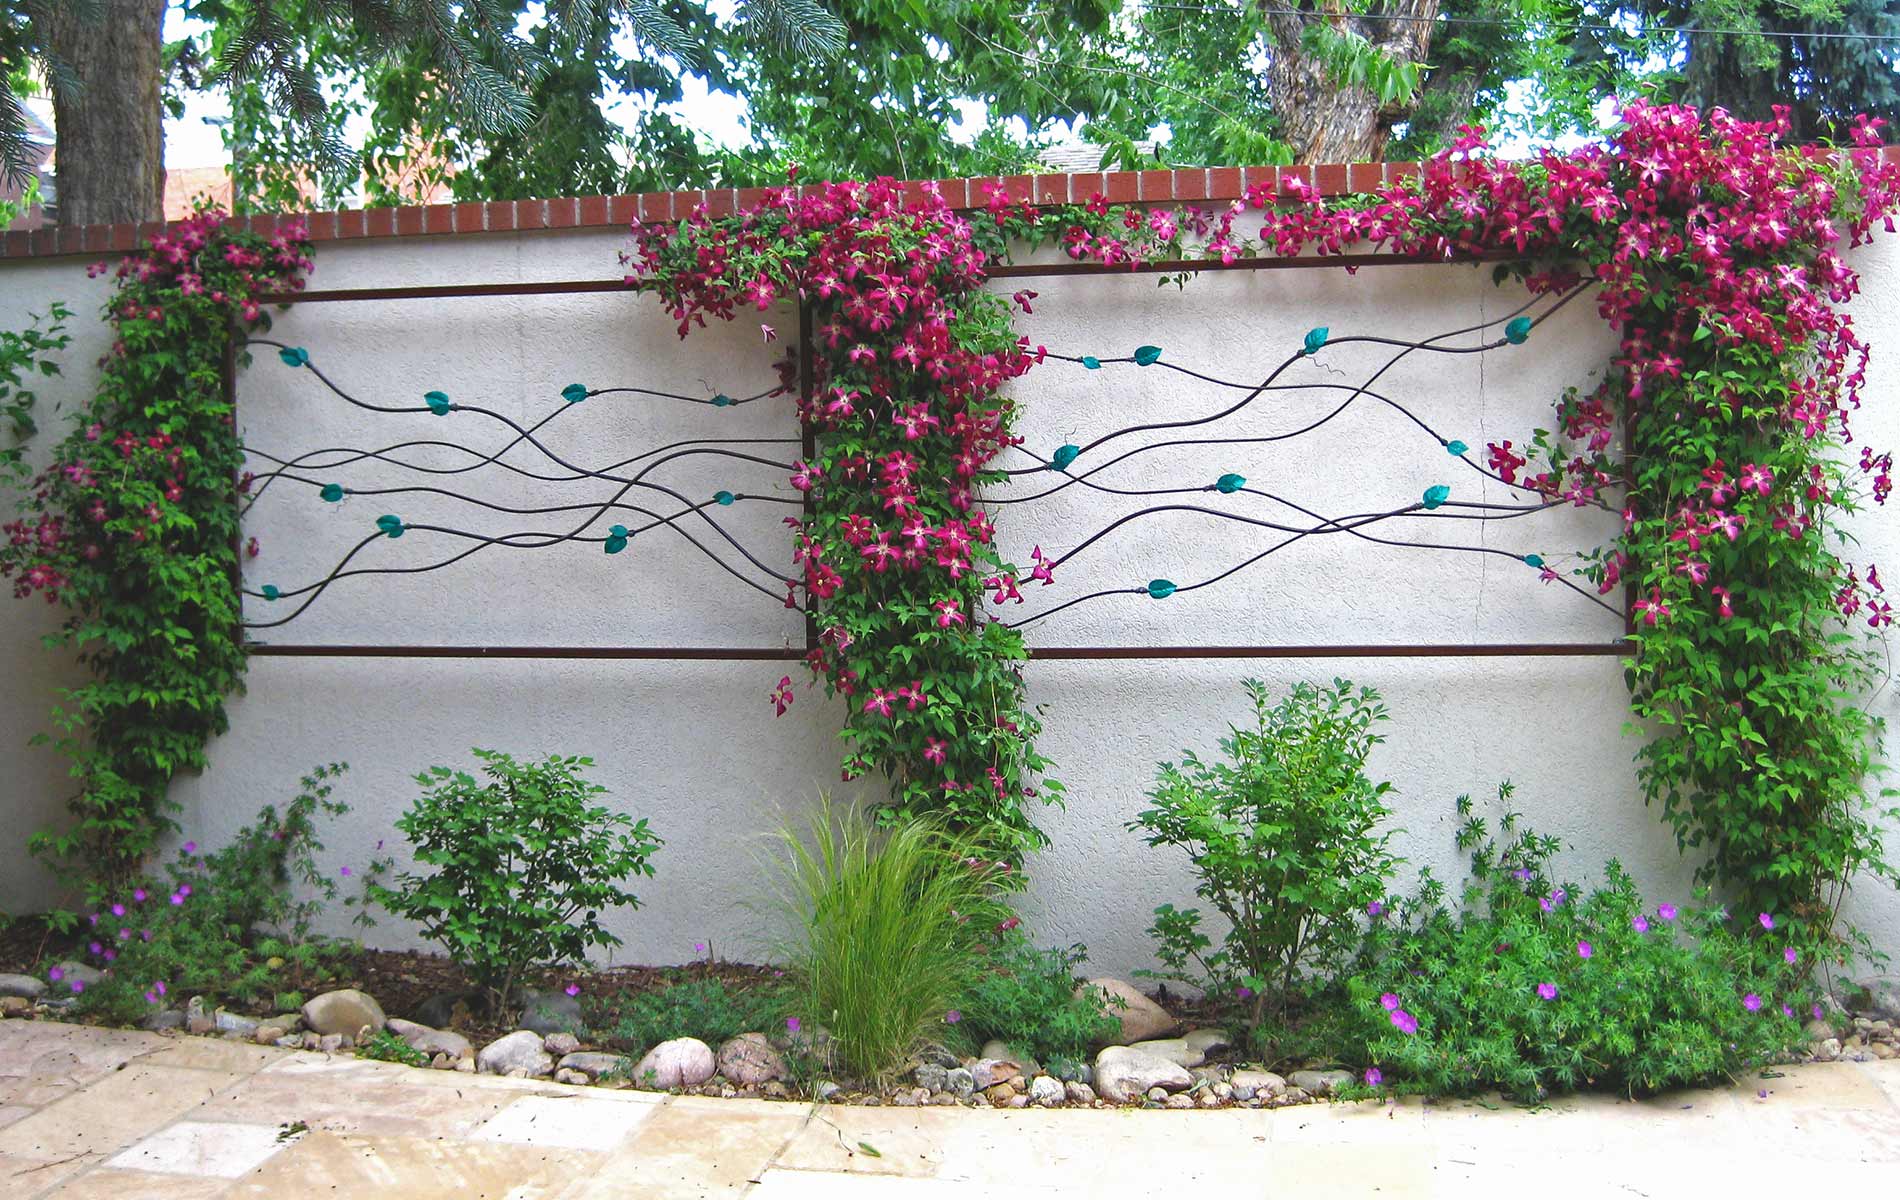 Wall Art with Cable Trellis and Climbing Vines in Custom Artwork Outdoor Room Featured in Sunset Magazine Mile High Landscaping in Denver